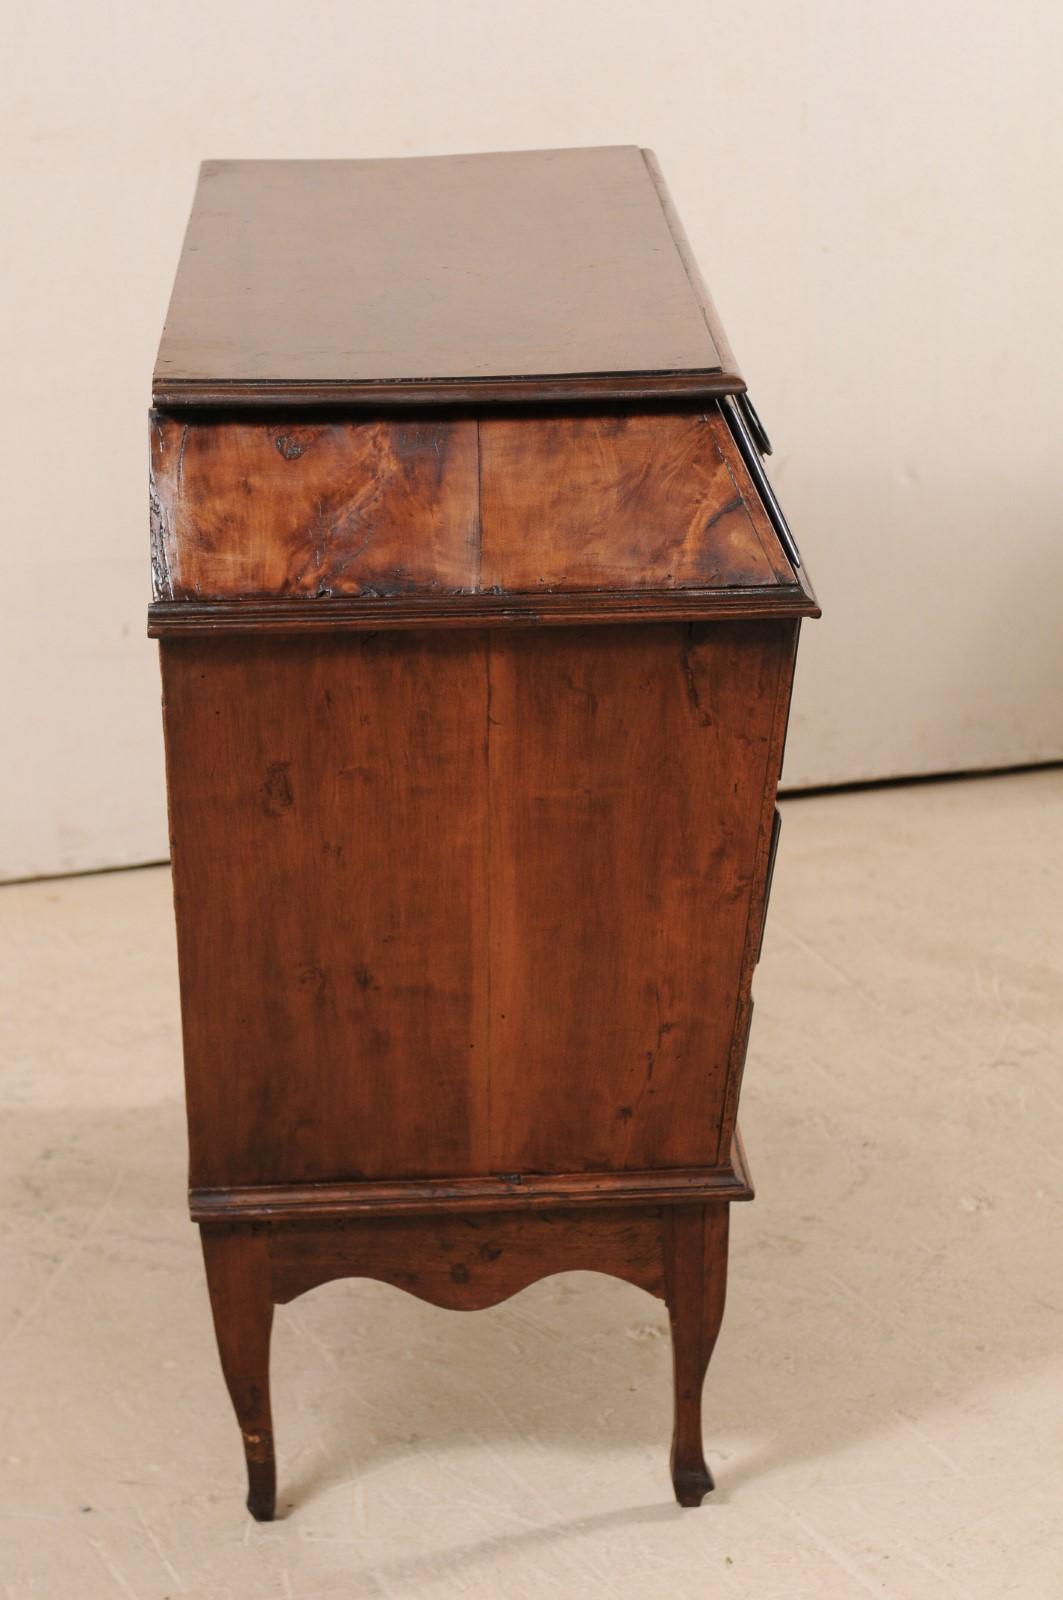 An Exceptional Late 18th C. Italian Walnut Commode w/ Unique Triangulated Shape For Sale 1